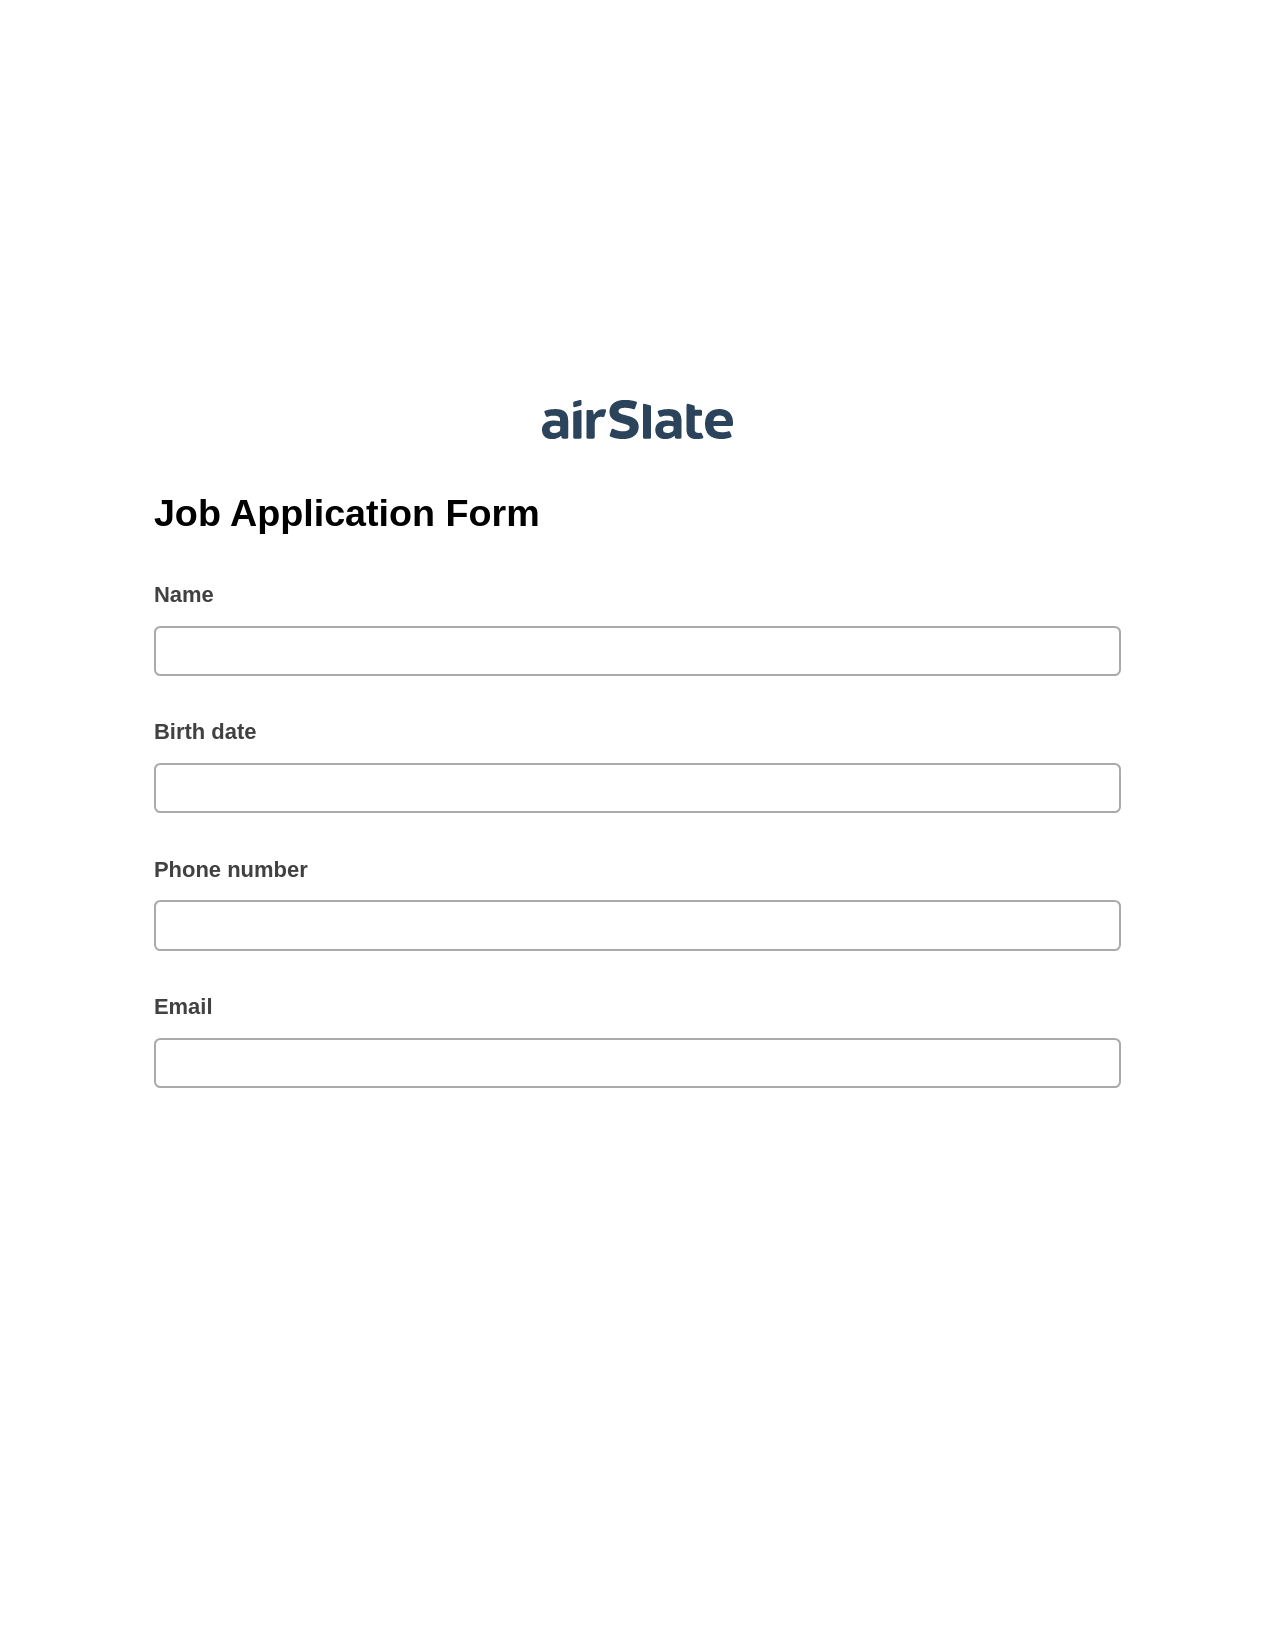 Job Application Form Pre-fill from CSV File Dropdown Options Bot, Remove Tags From Slate Bot, Export to Formstack Documents Bot